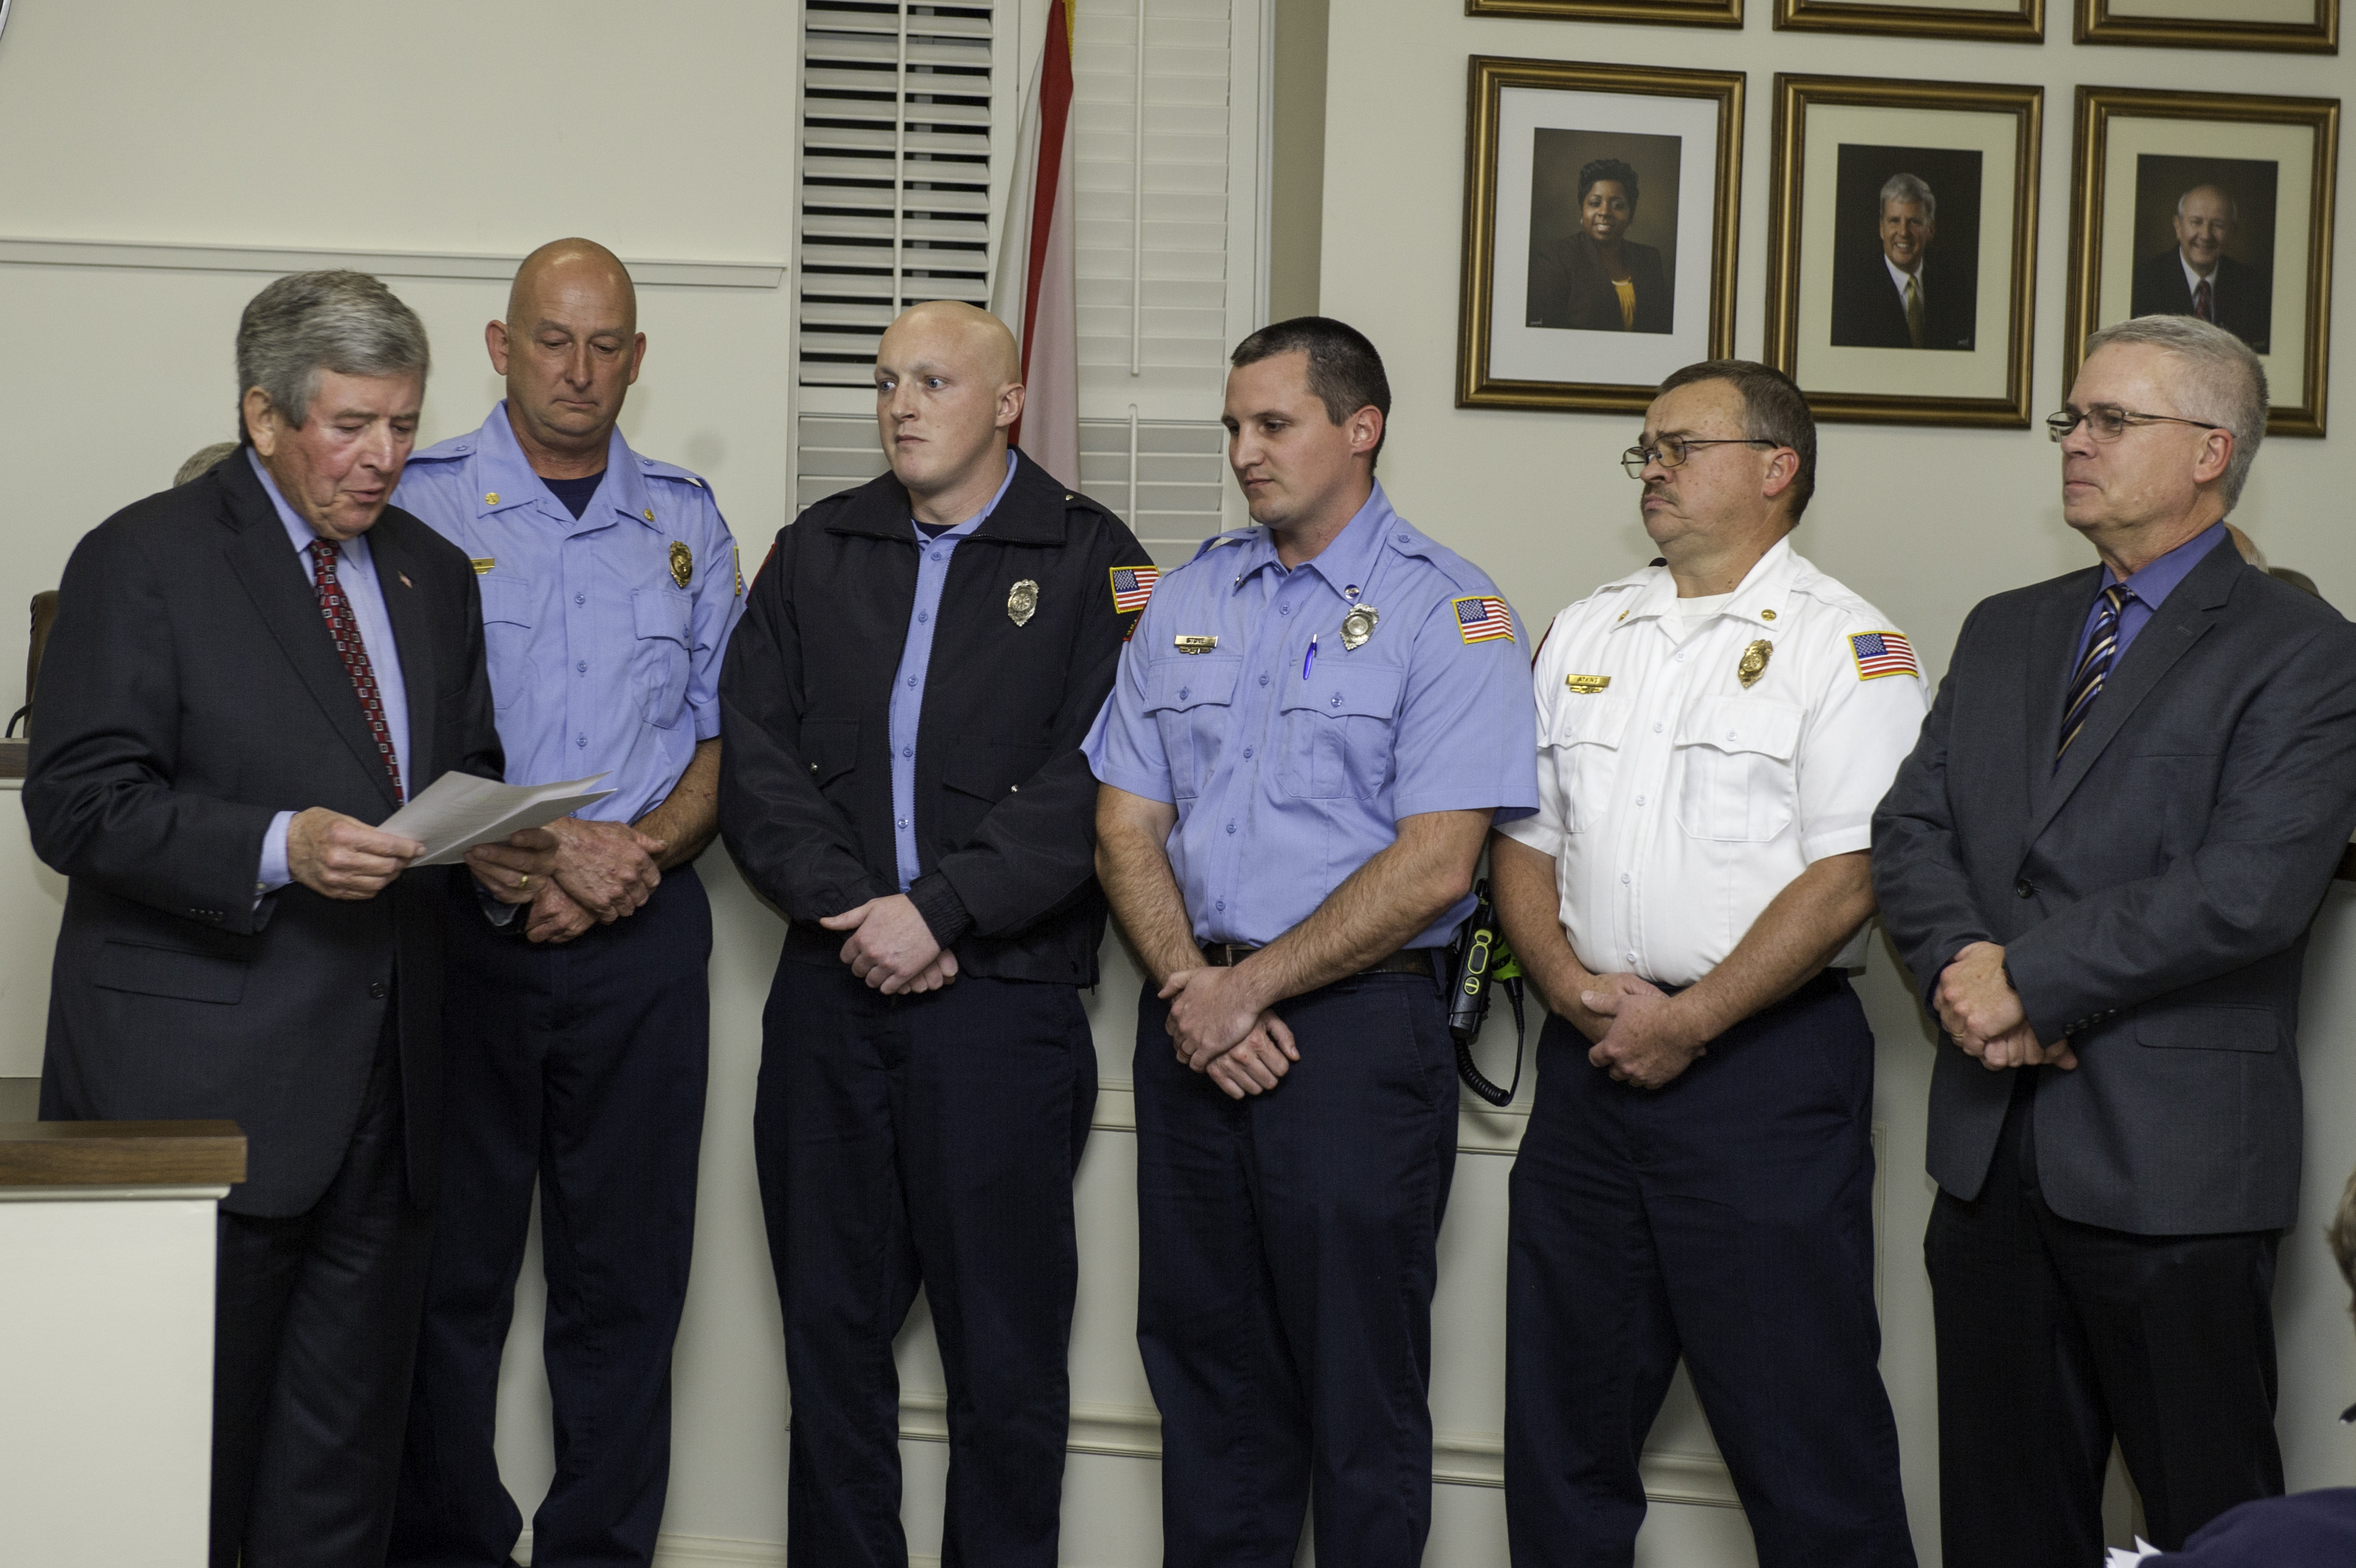 Council recognizes ‘Fireman of the Year’